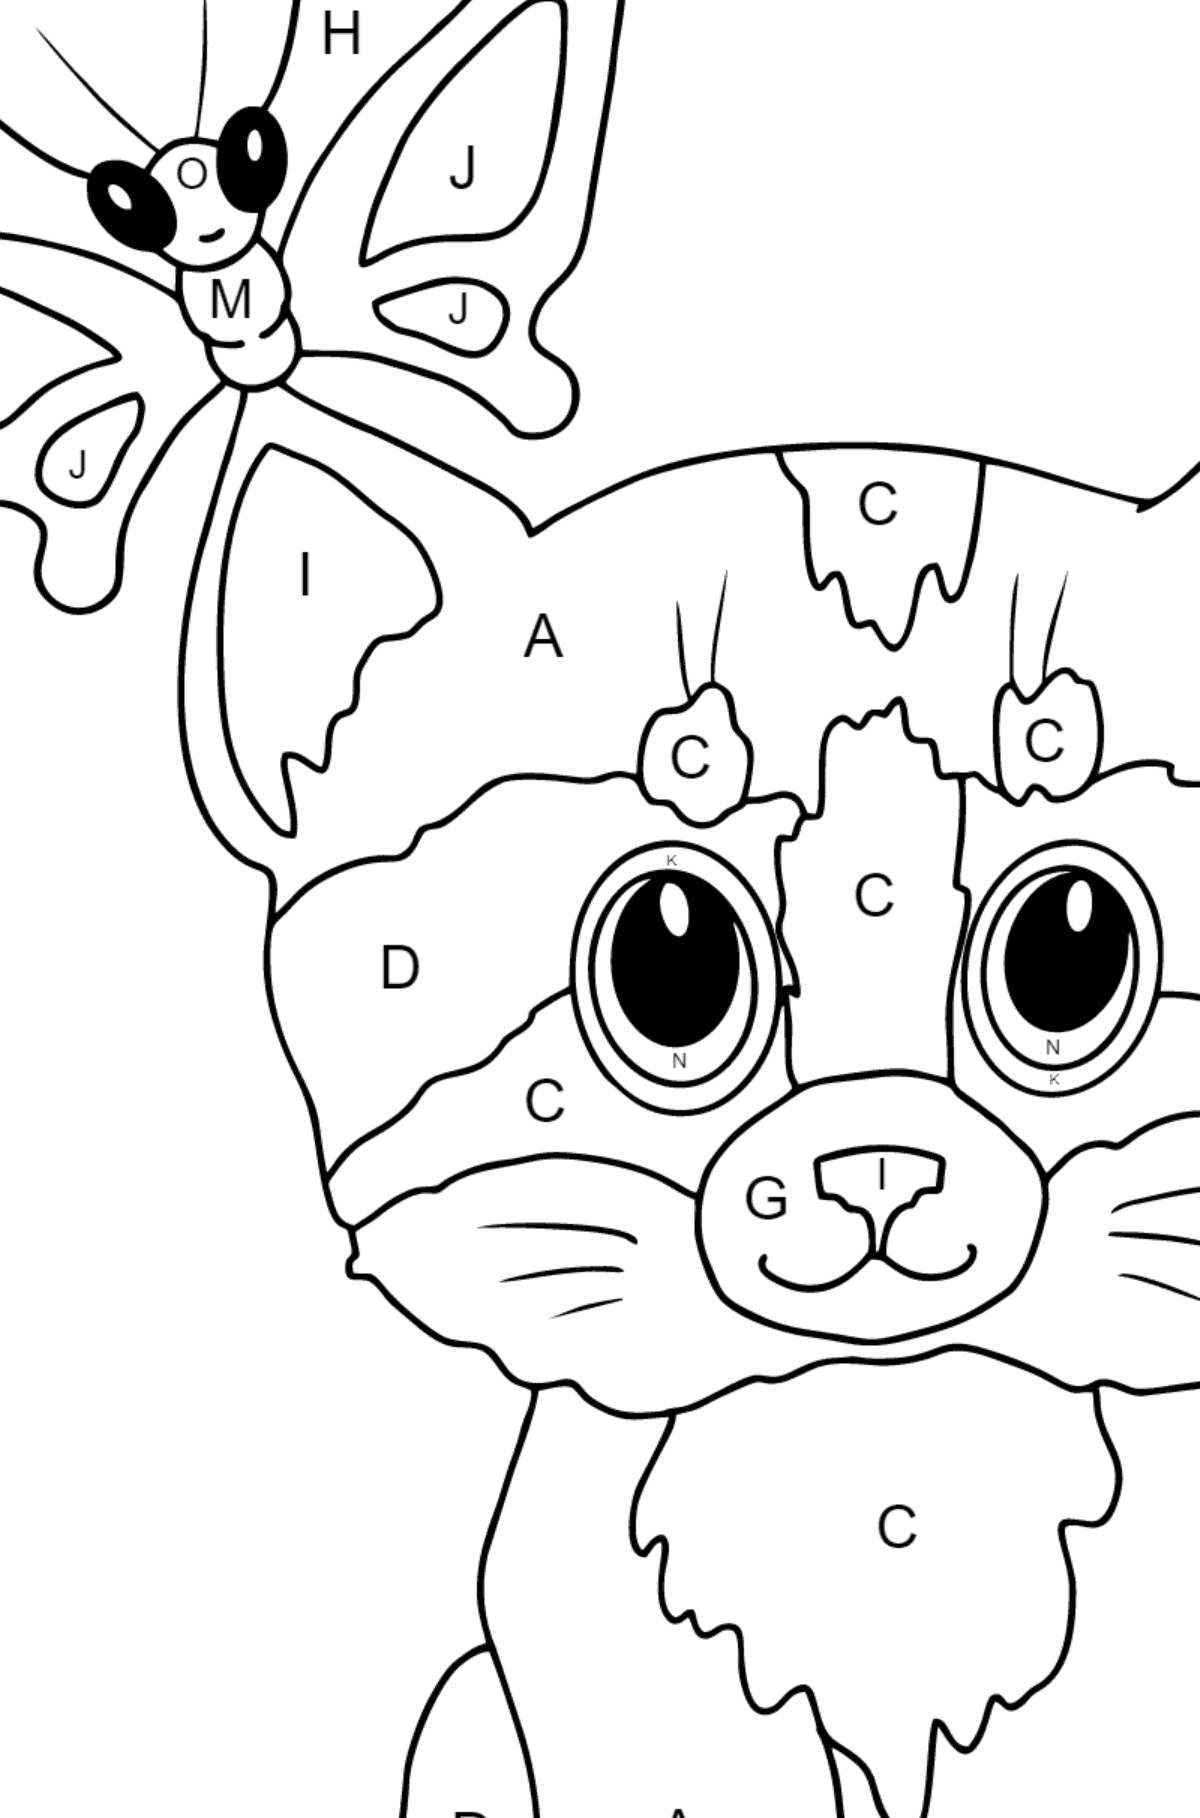 Gentle Kitten coloring page - Coloring by Letters for Kids